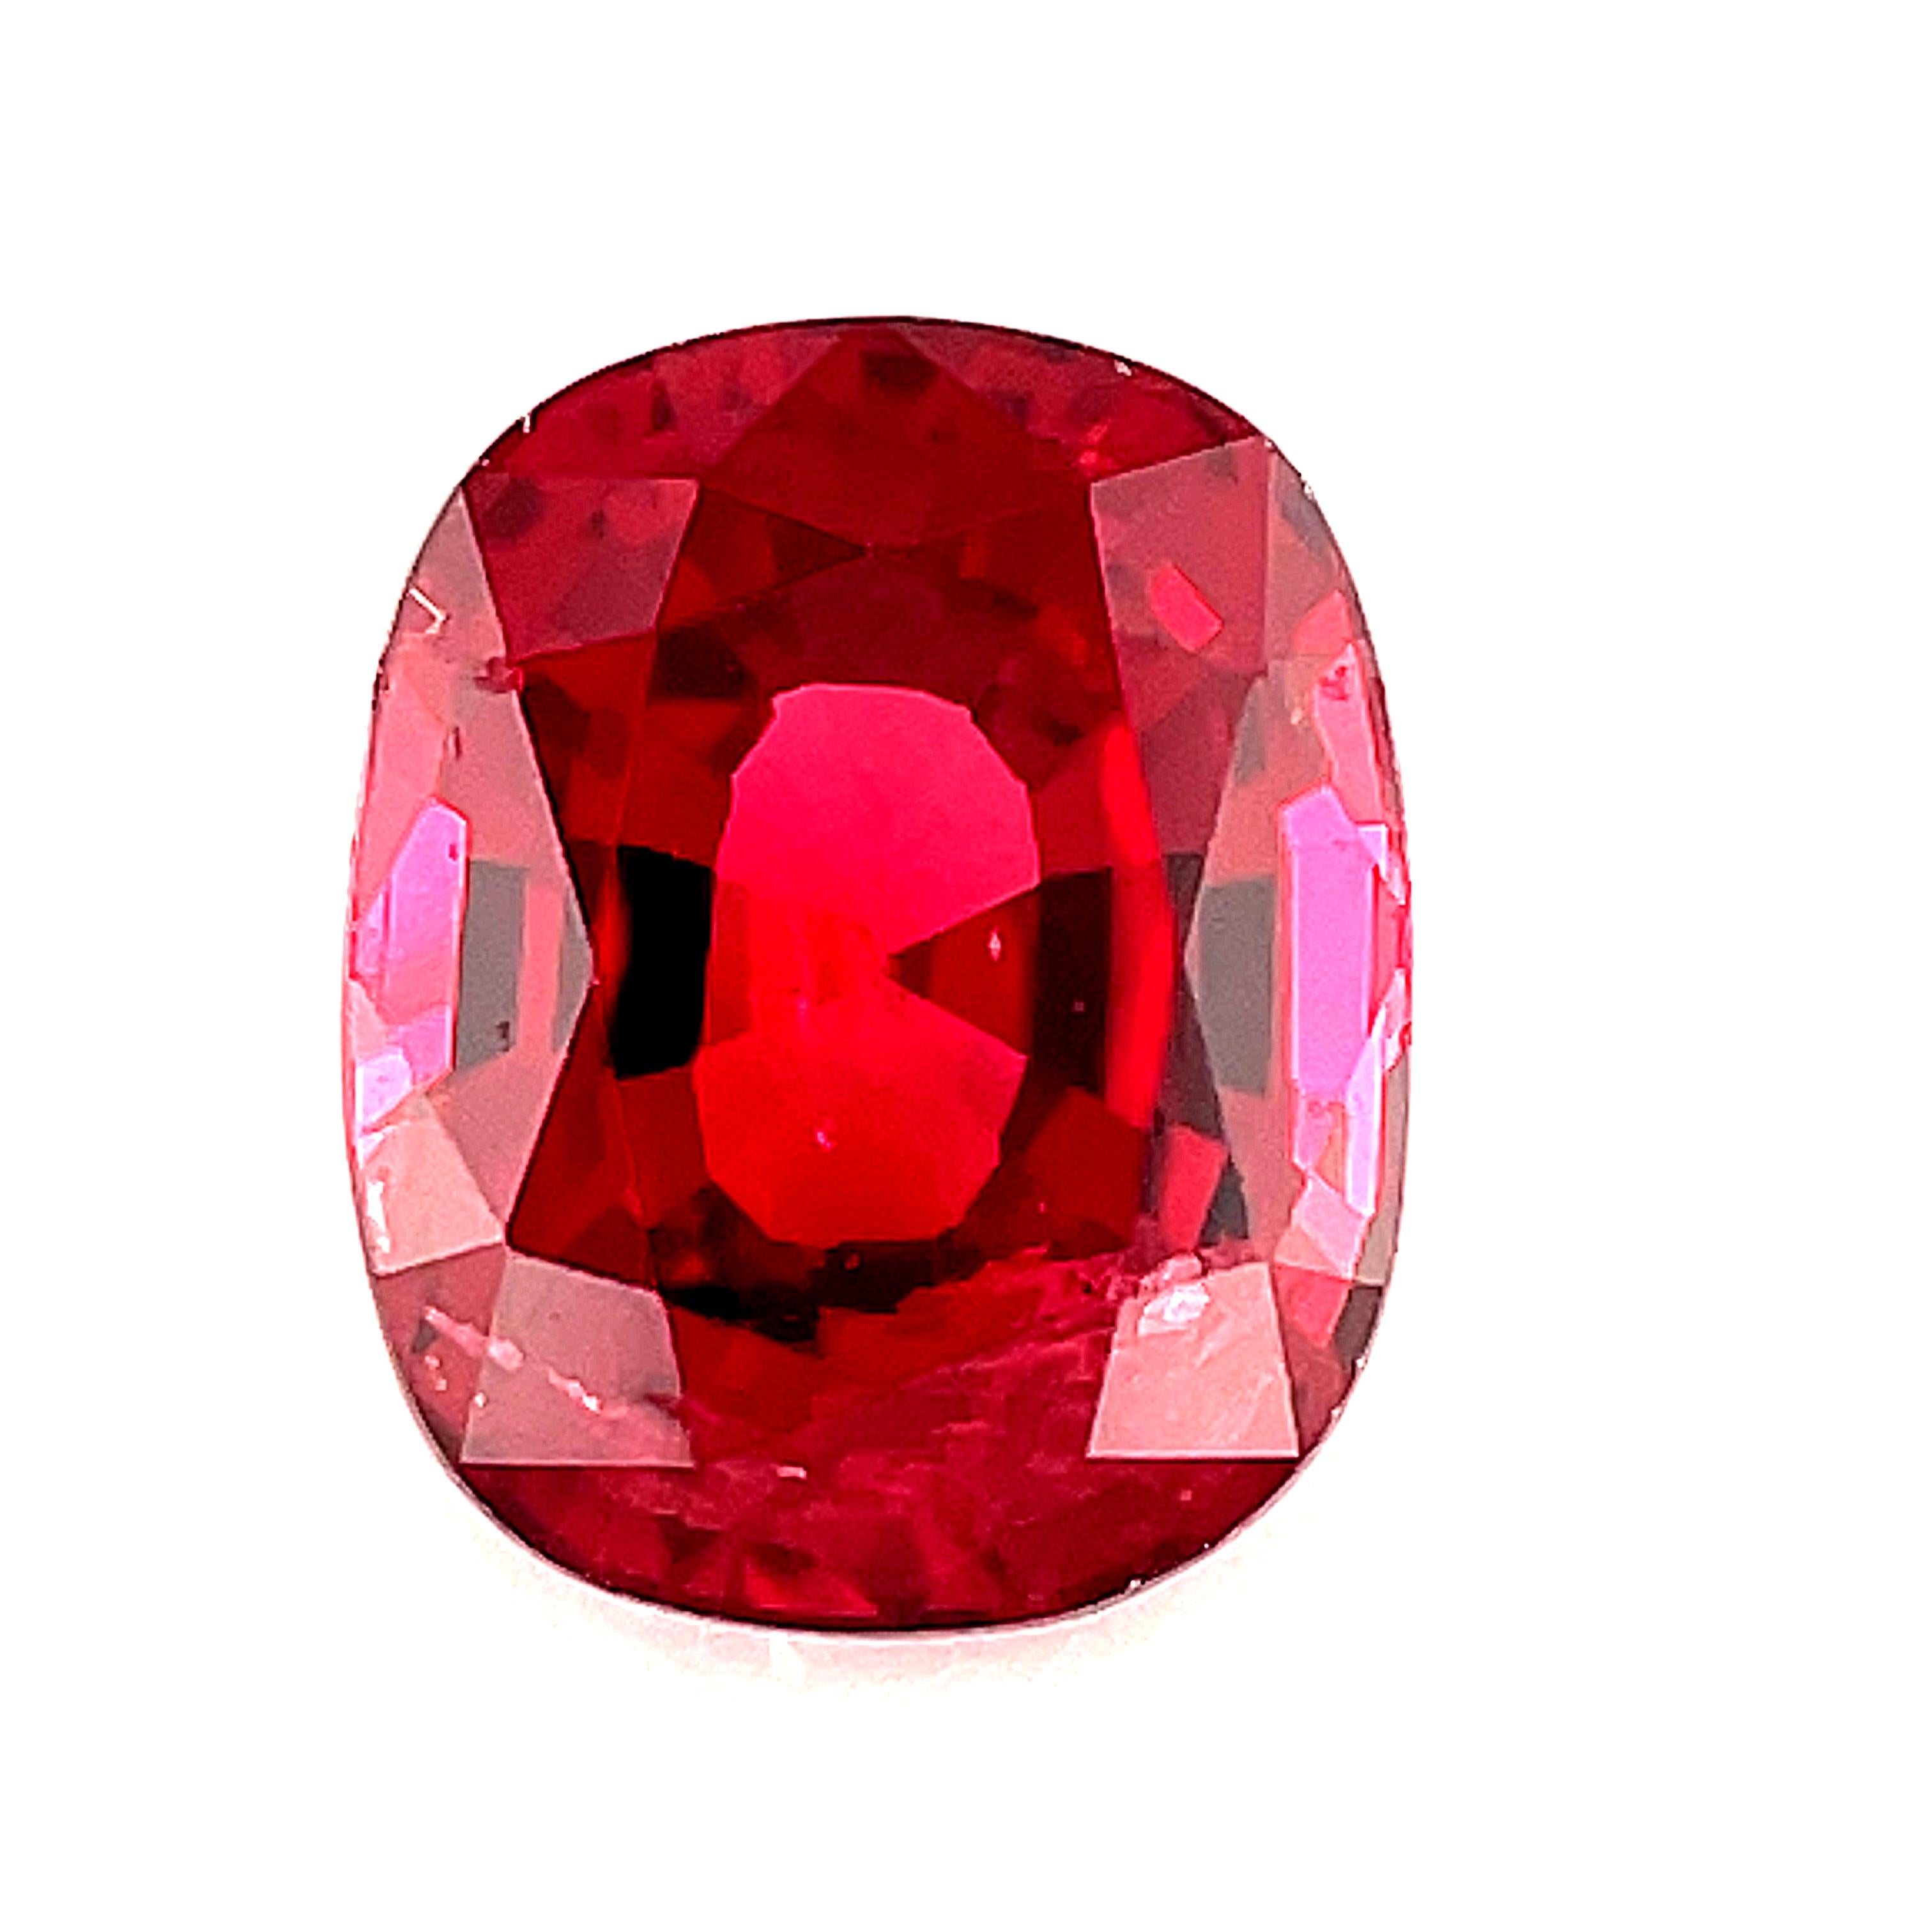 .85 Carat Cushion Cut Unset Loose Unmounted Red Spinel Gemstone For Sale 3